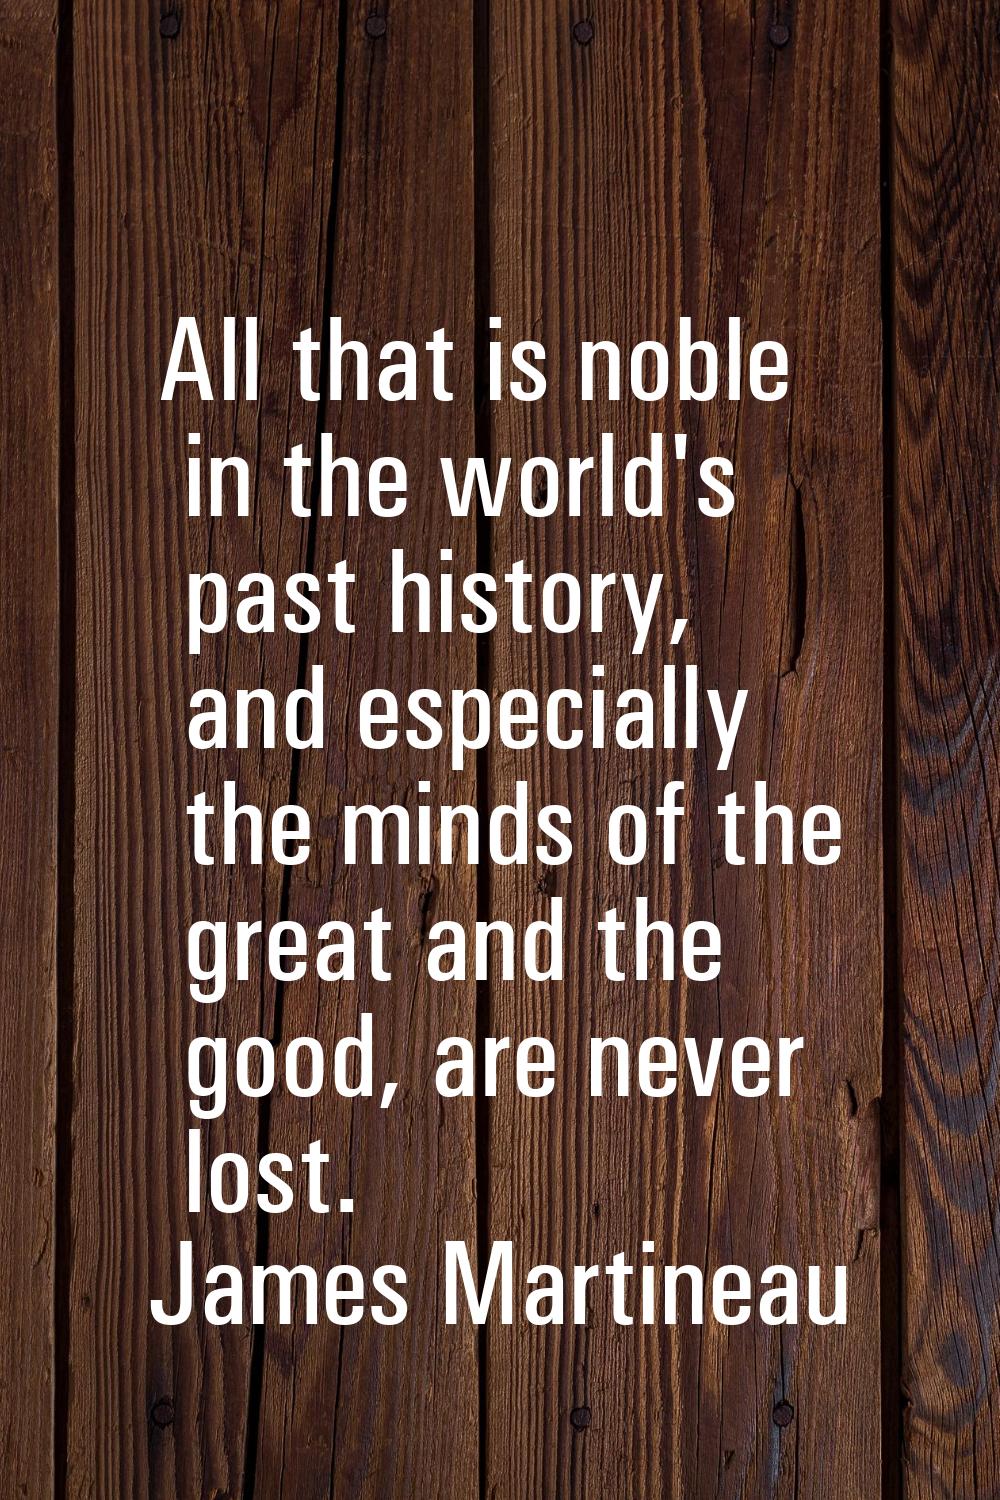 All that is noble in the world's past history, and especially the minds of the great and the good, 